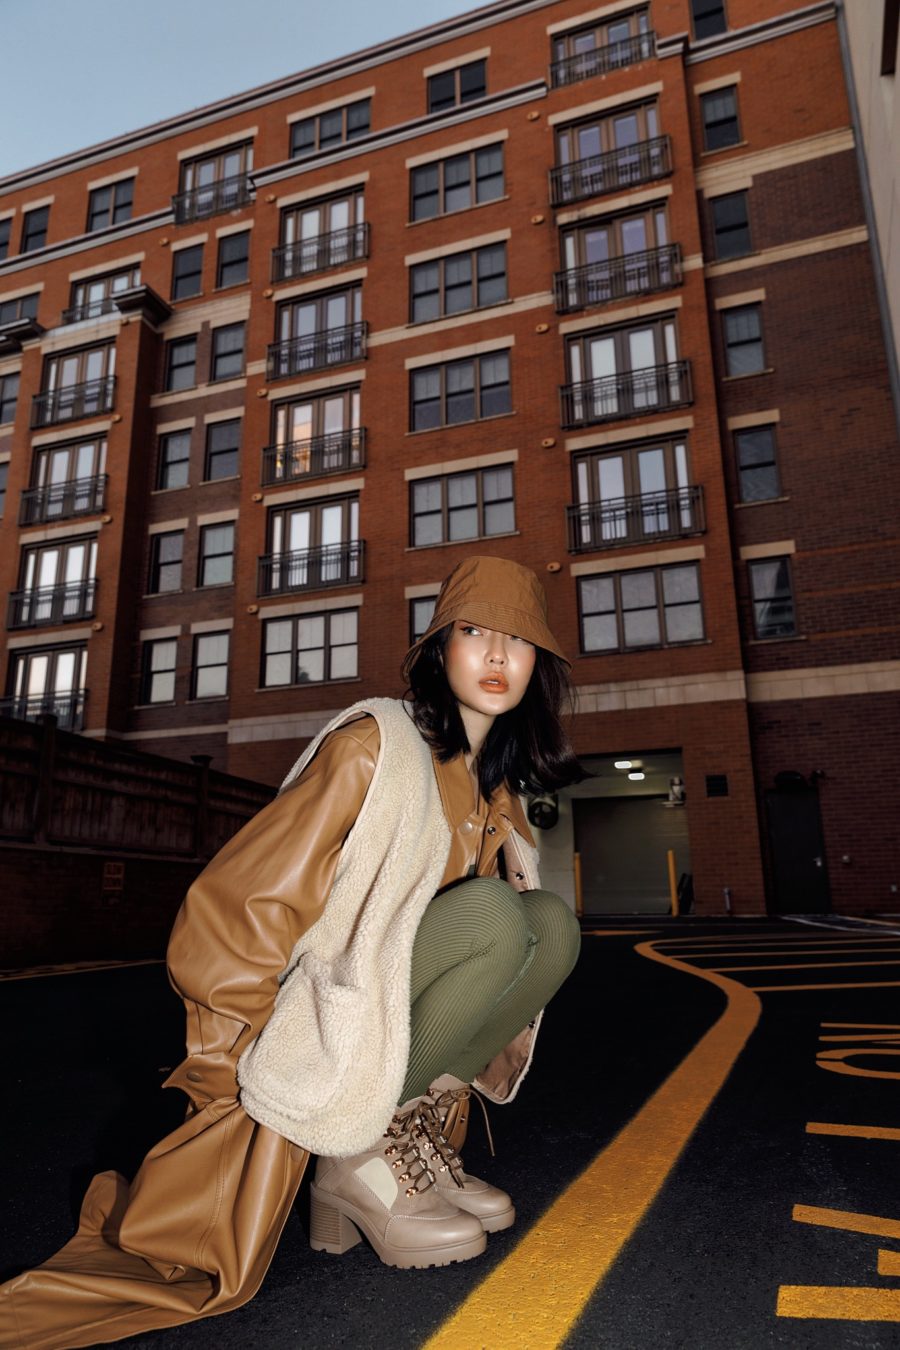 jessica wang wearing a fall 2021 outfit featuring a leather jacket, shearling vest, rib knit leggings, and lace up combat boots // Jessica Wang - Notjessfashion.com